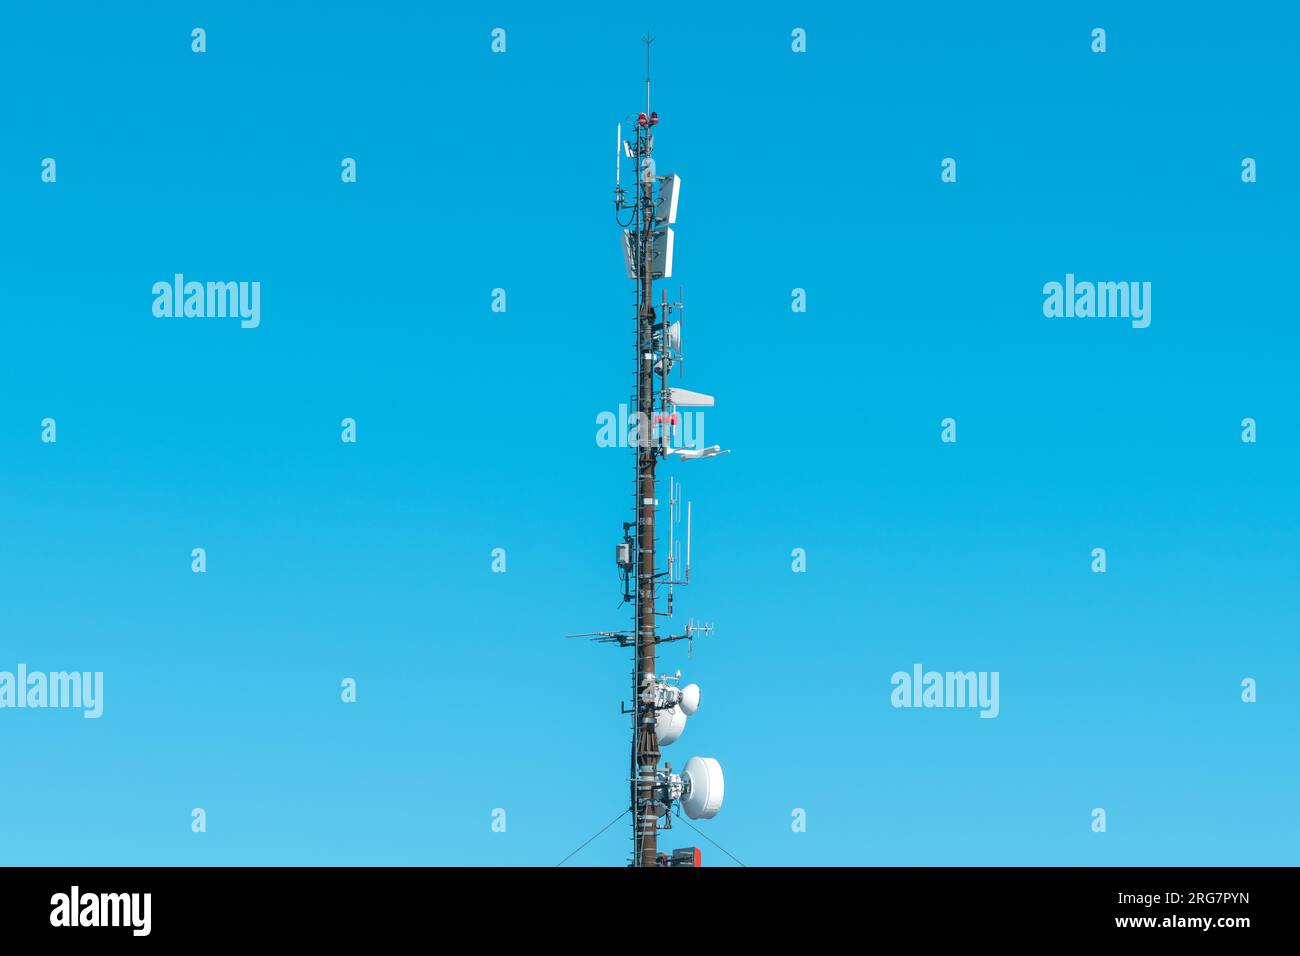 Large telecommunication tower with antennas and satellite dishes, mobile telephony signal repeaters and 4g transmitters and emitters against blue sky Stock Photo